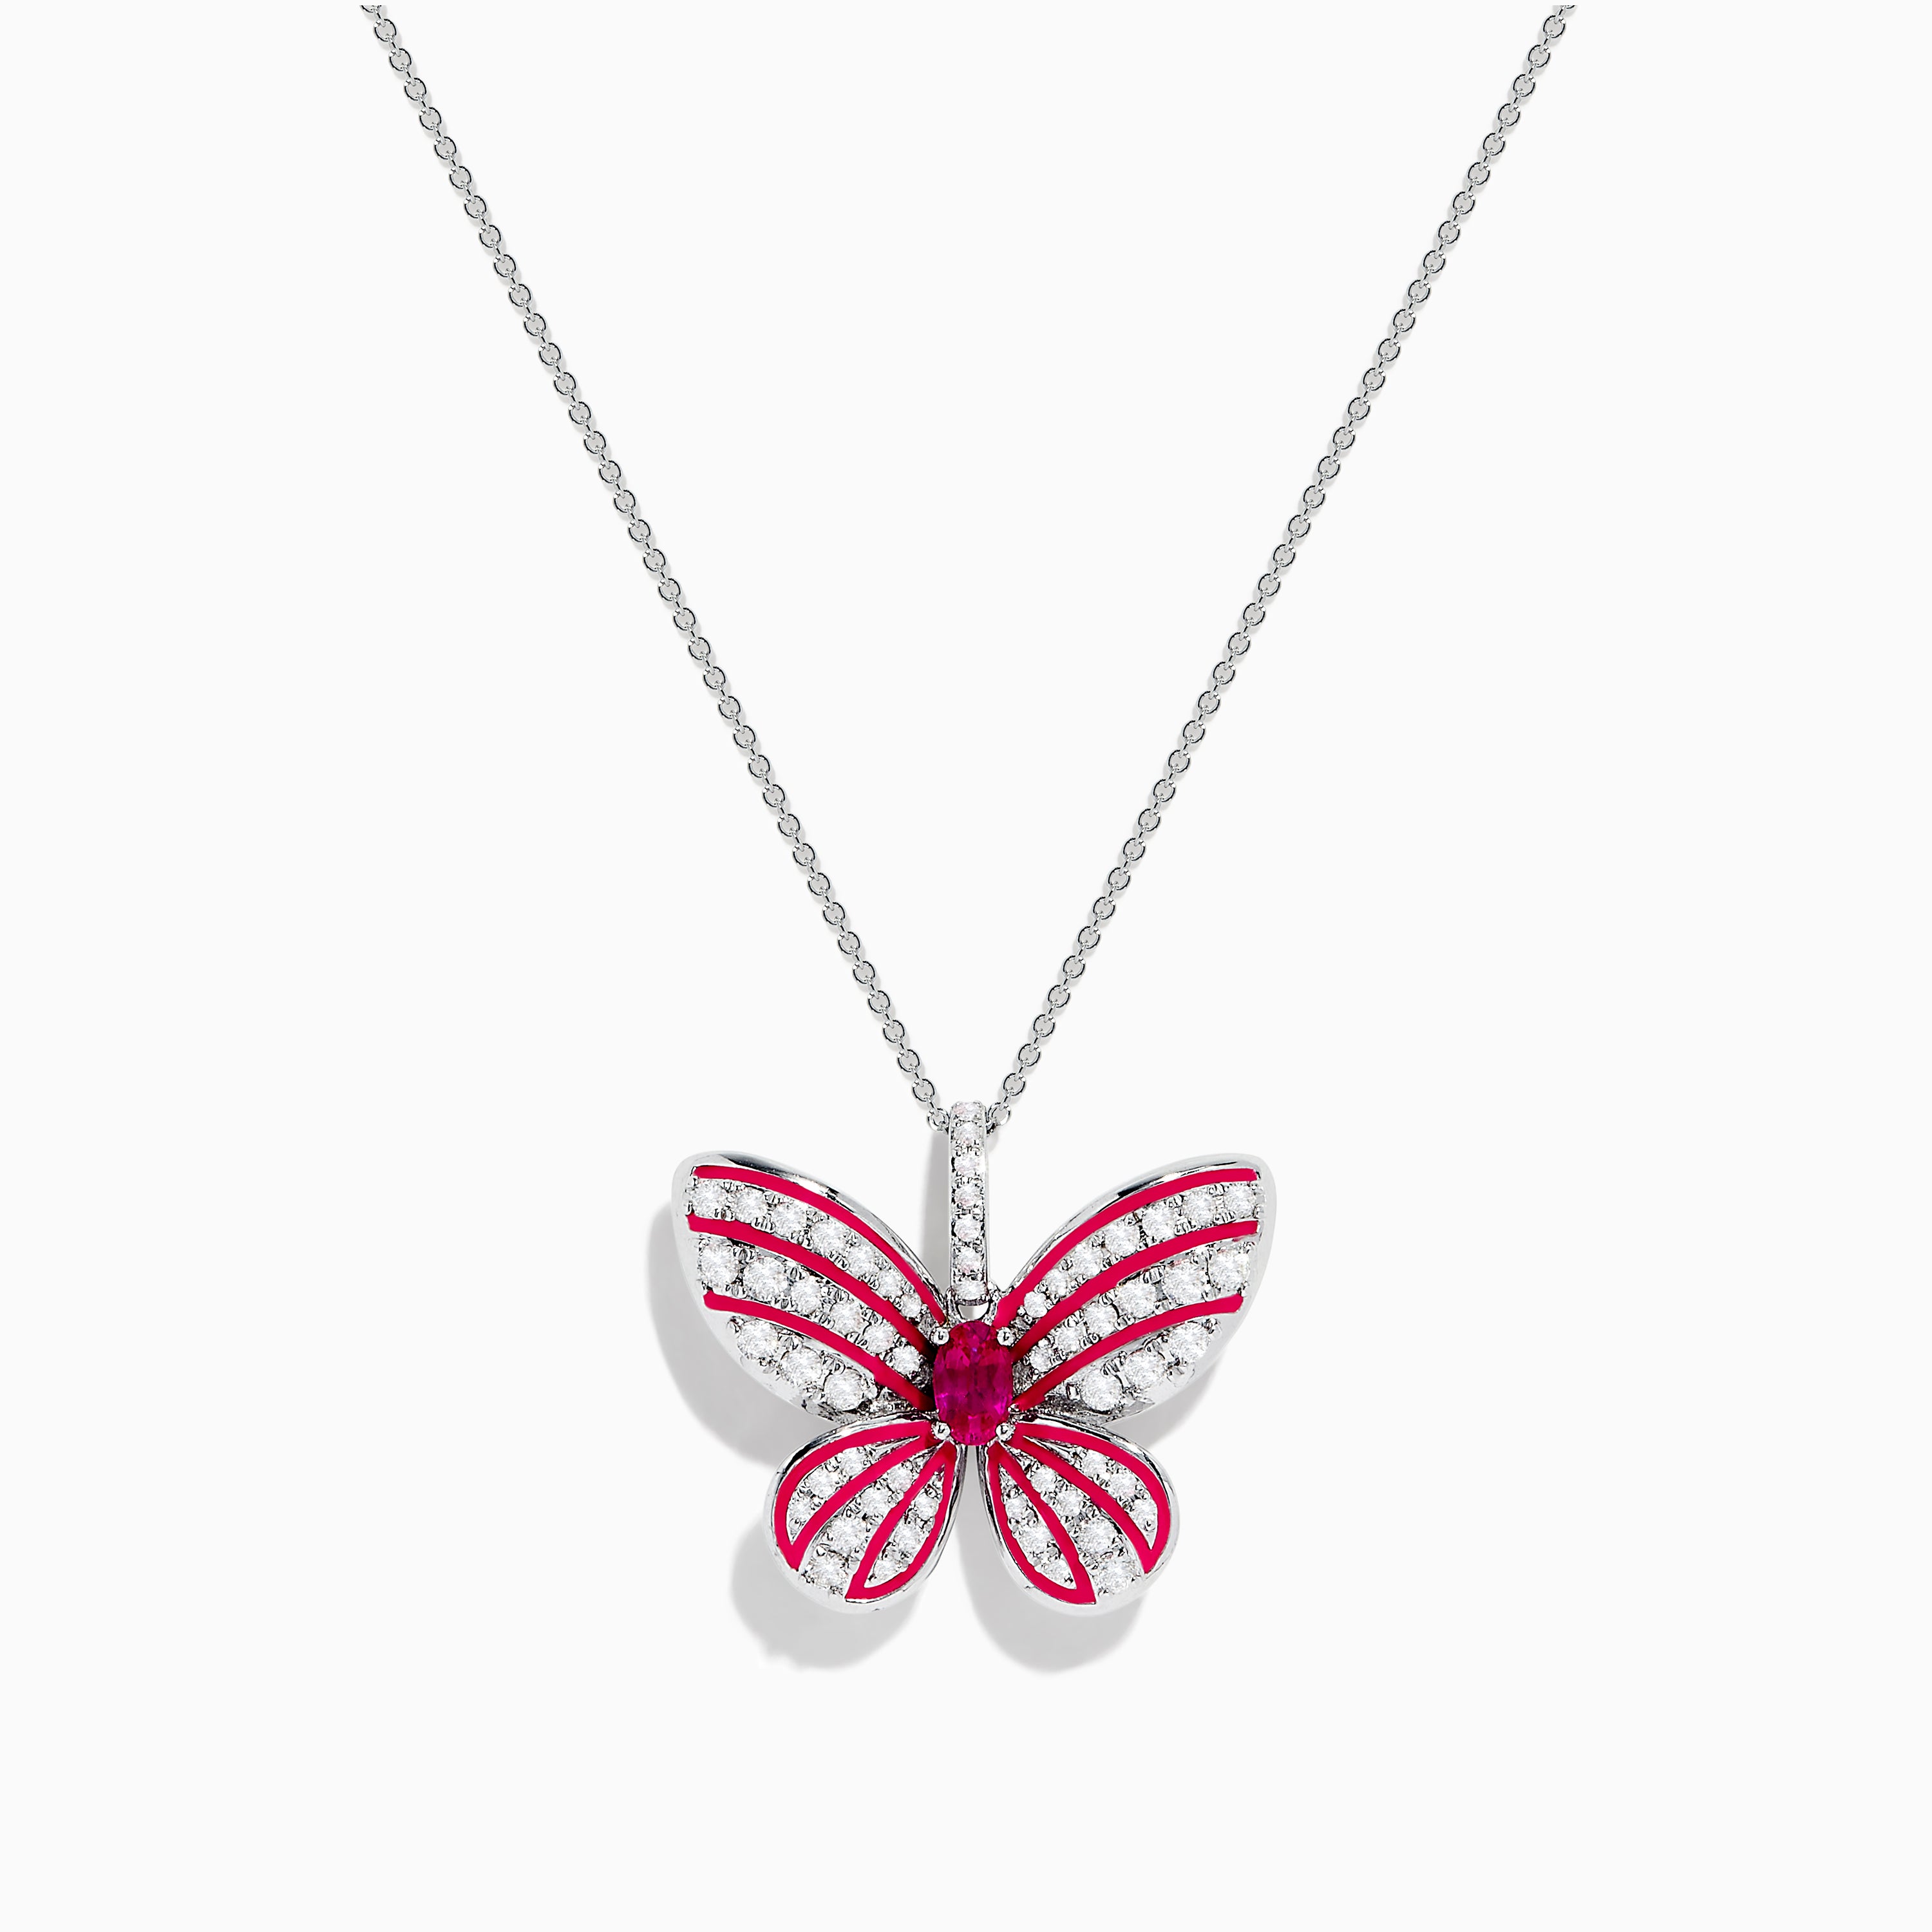 Ruby and Sapphire Butterfly Pendant Necklace | HX Jewelry